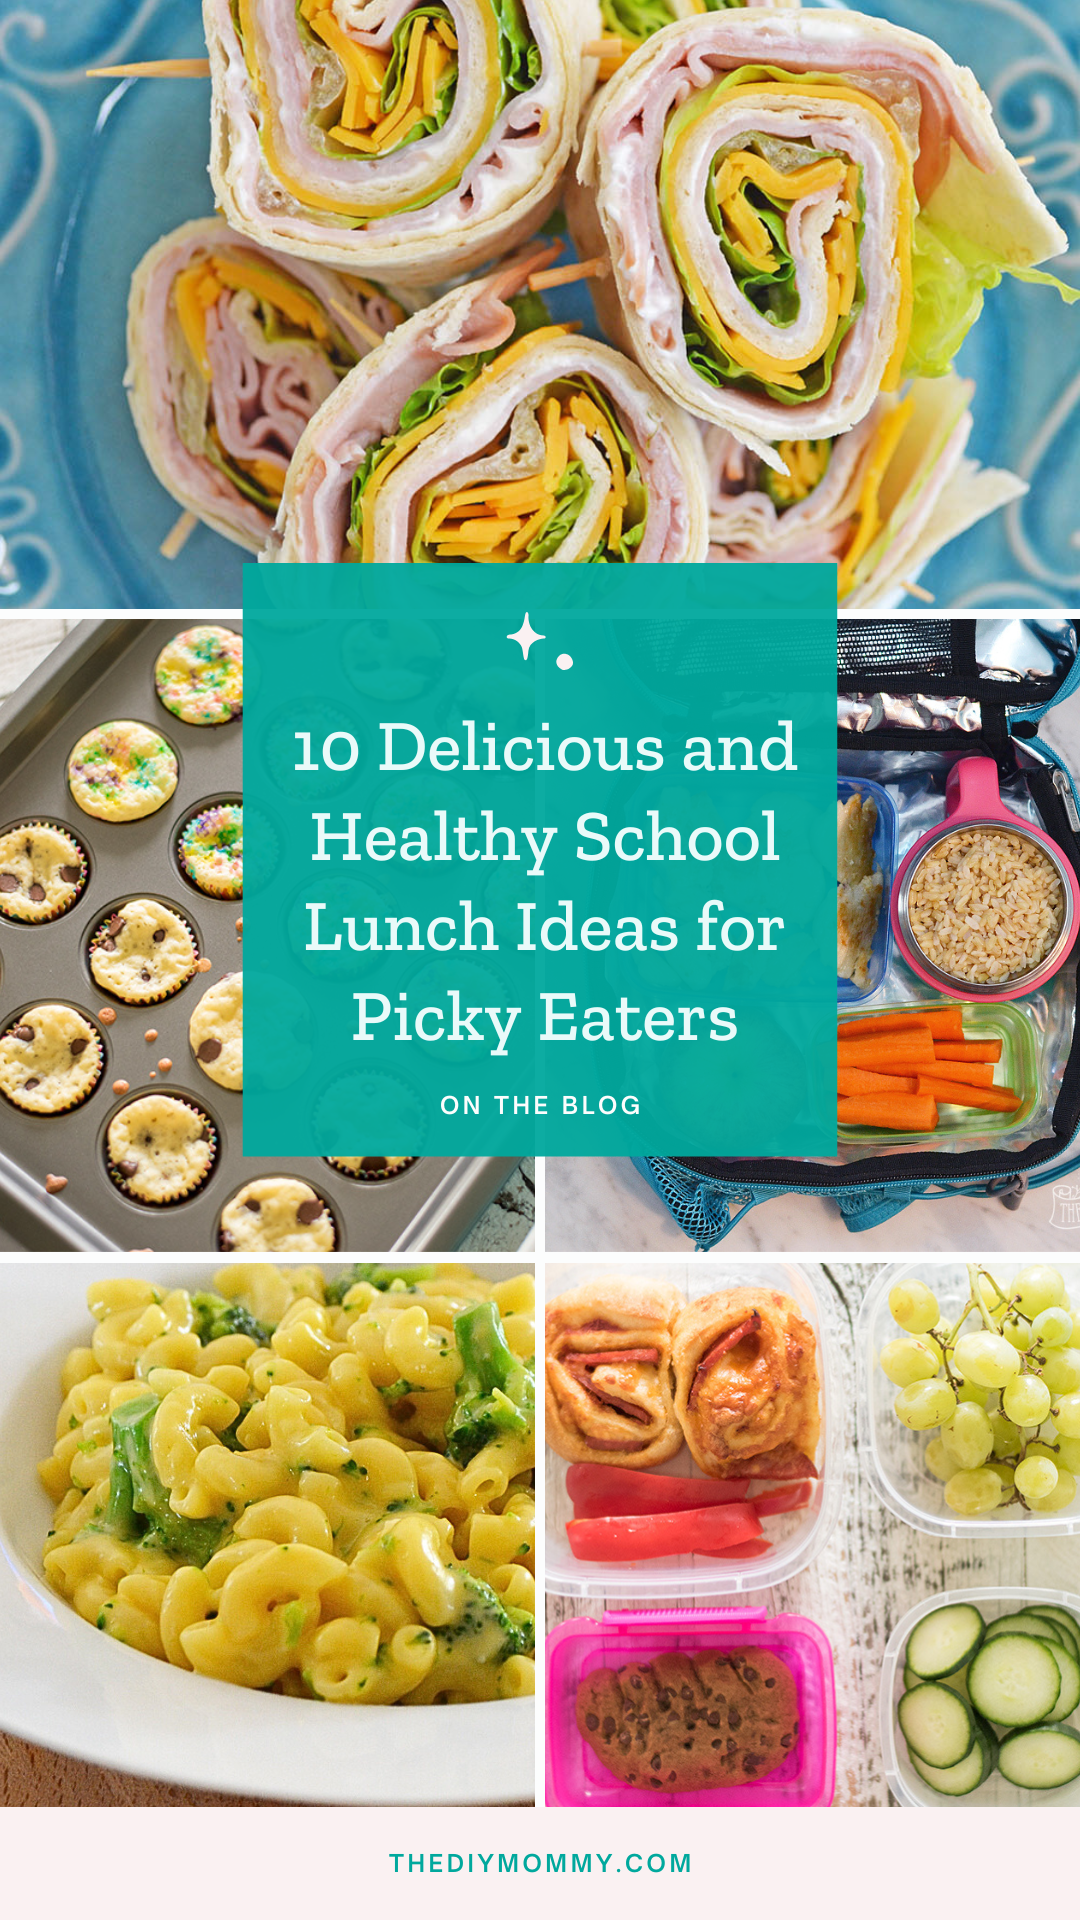 10 Delicious and Healthy School Lunch Ideas for Picky Eaters